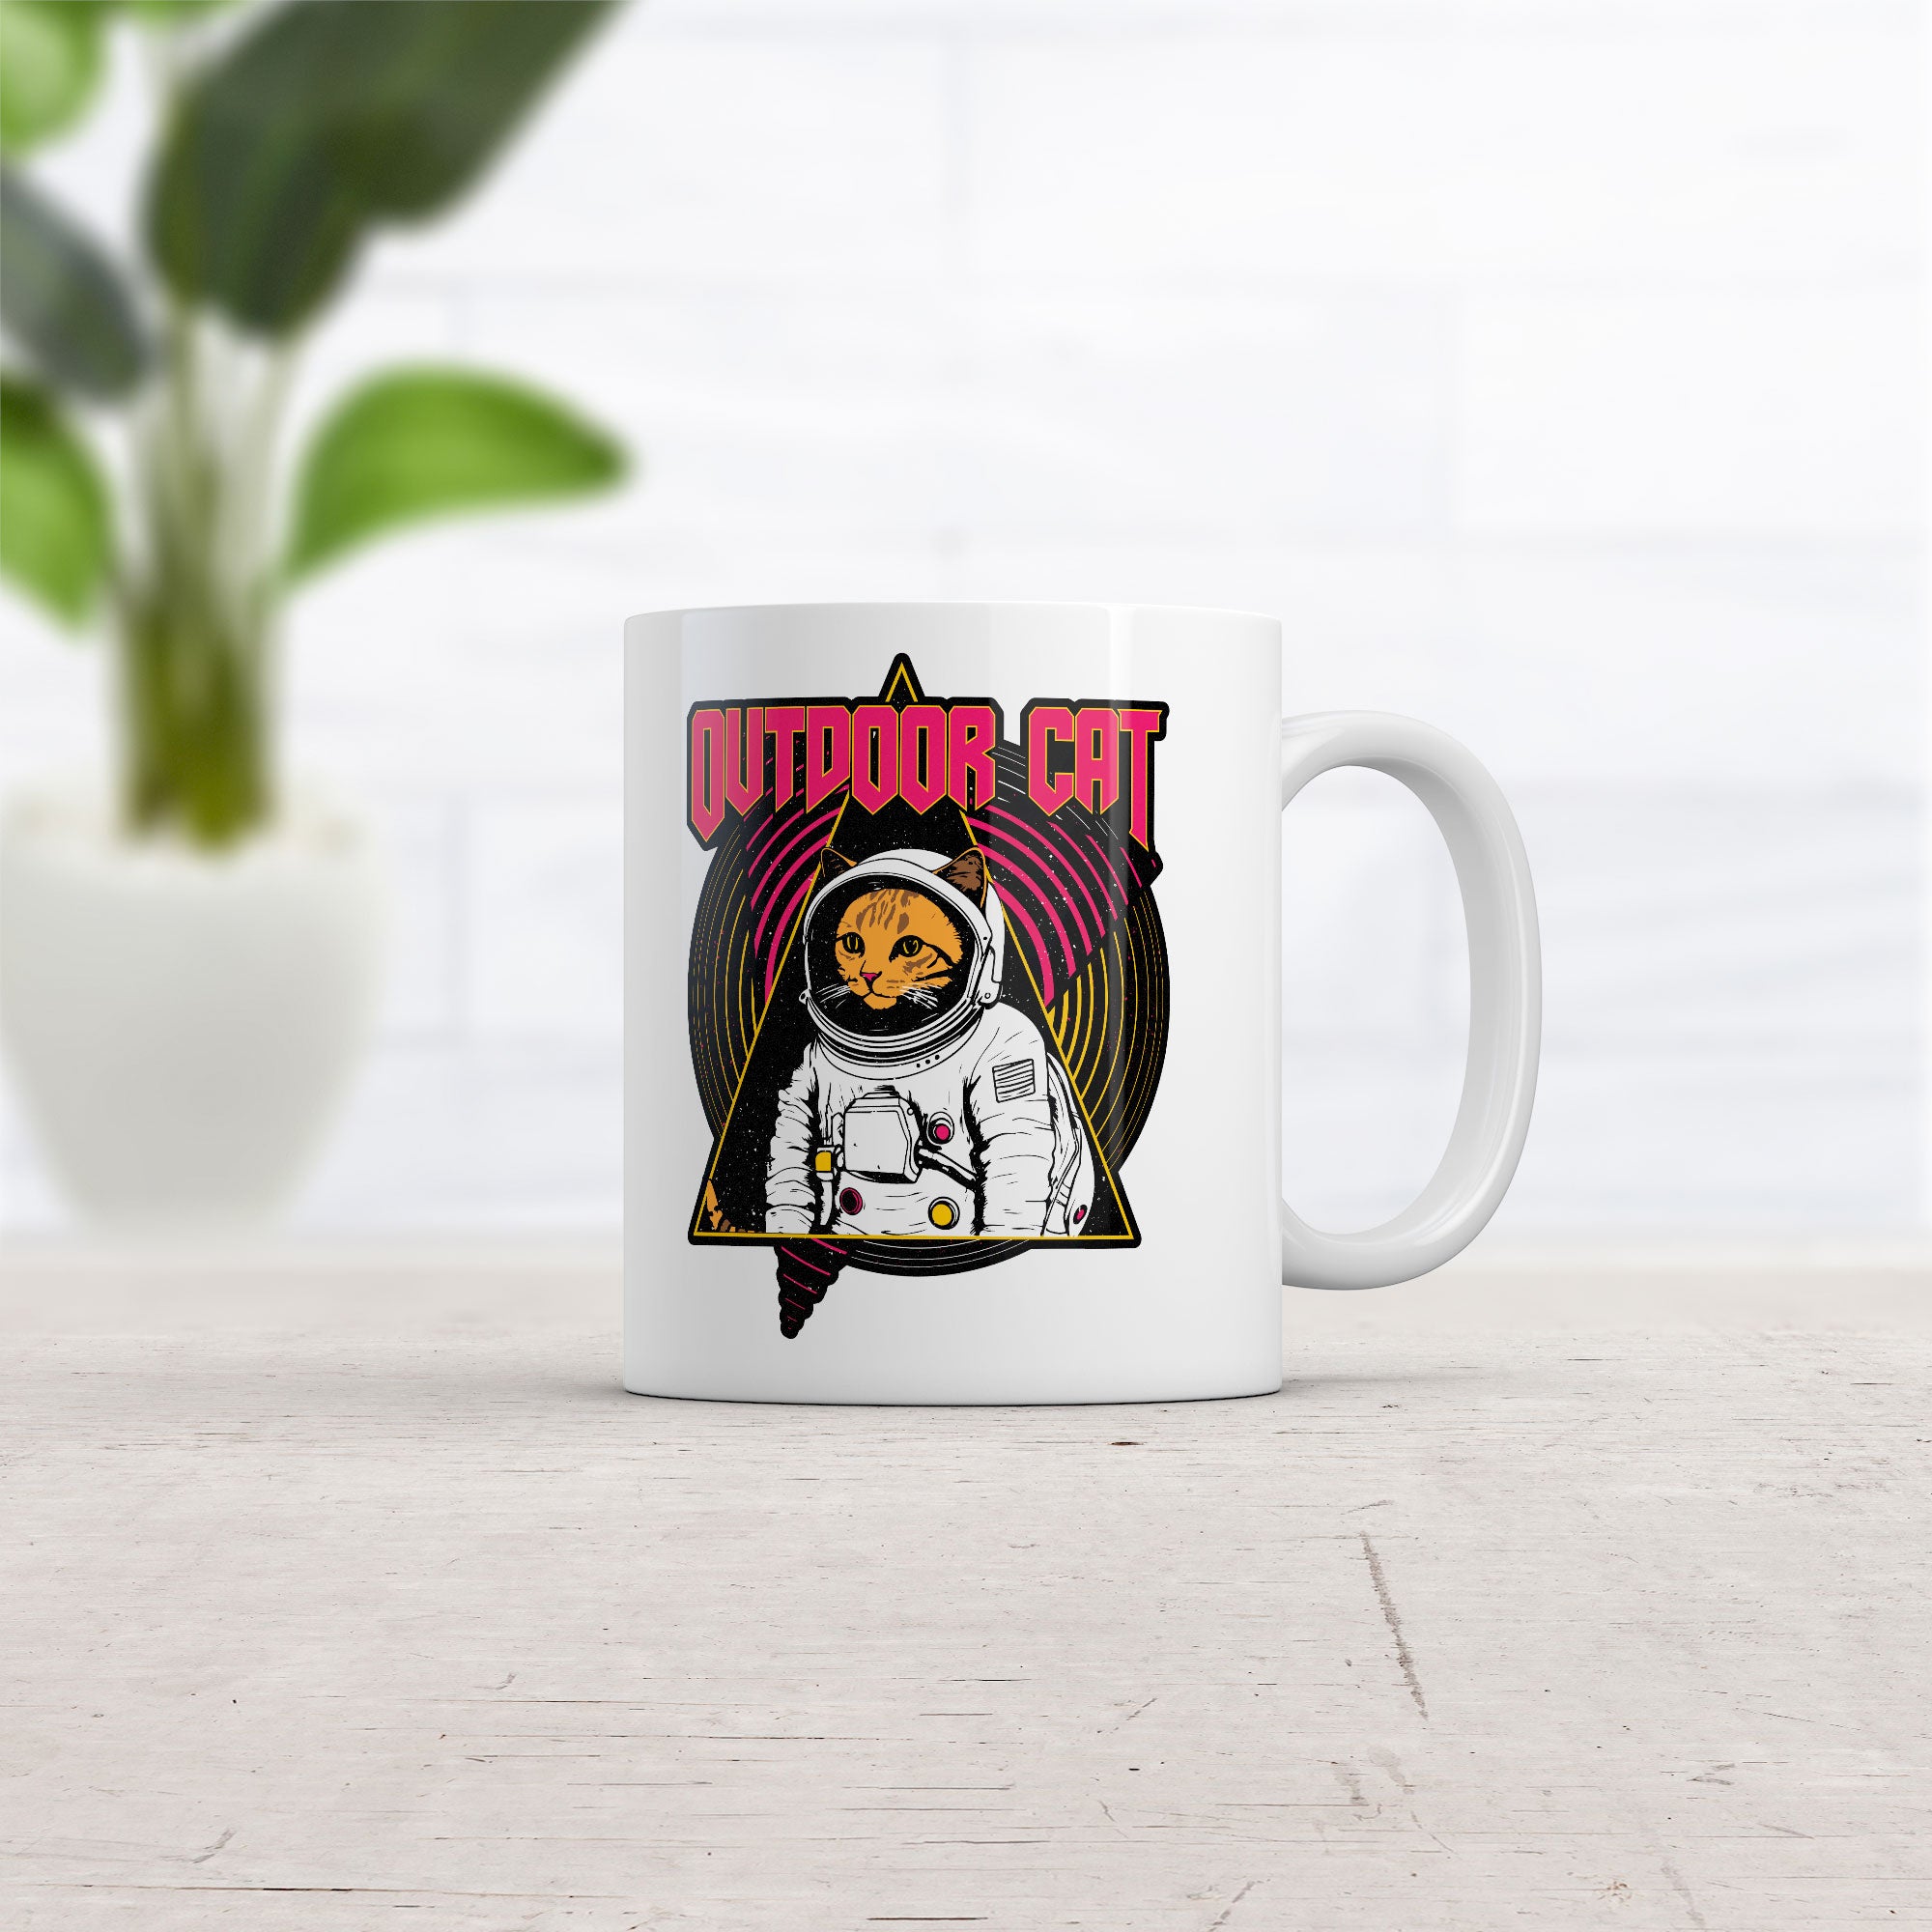 Funny White Outdoor Cat Space Coffee Mug Nerdy Cat space Tee